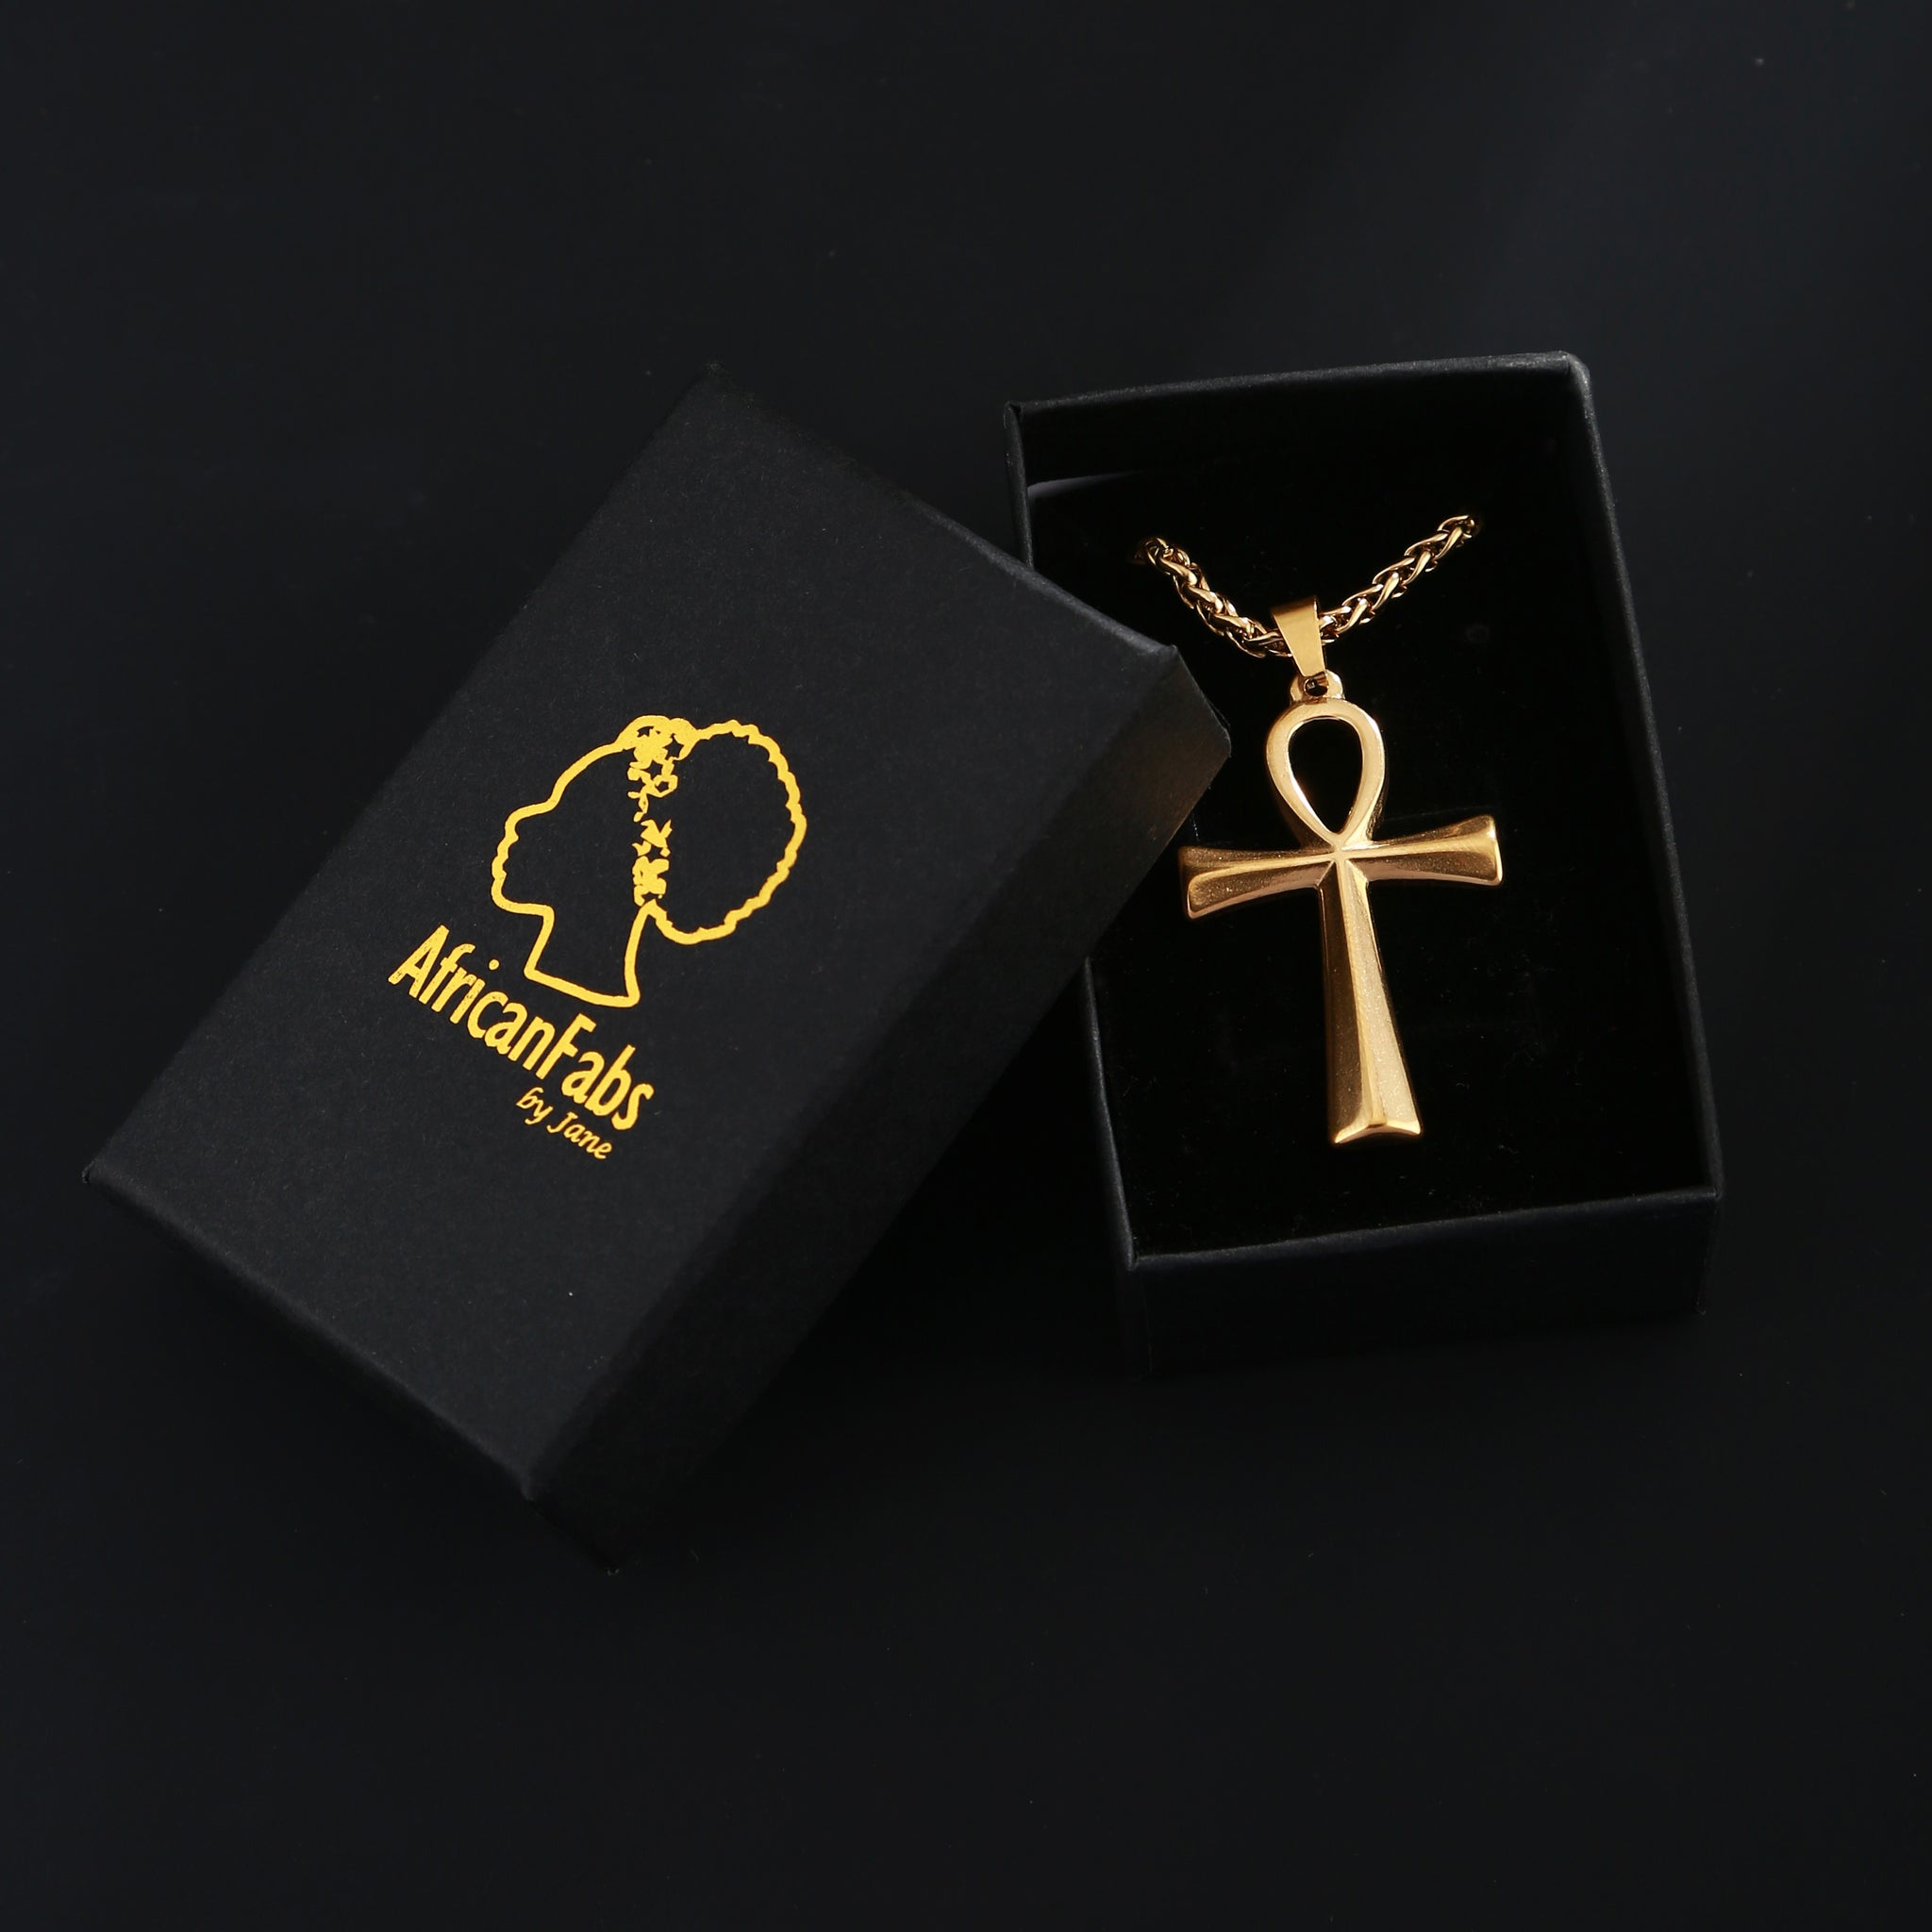 Necklace / pendant - Cross African continent Gold- Double chain